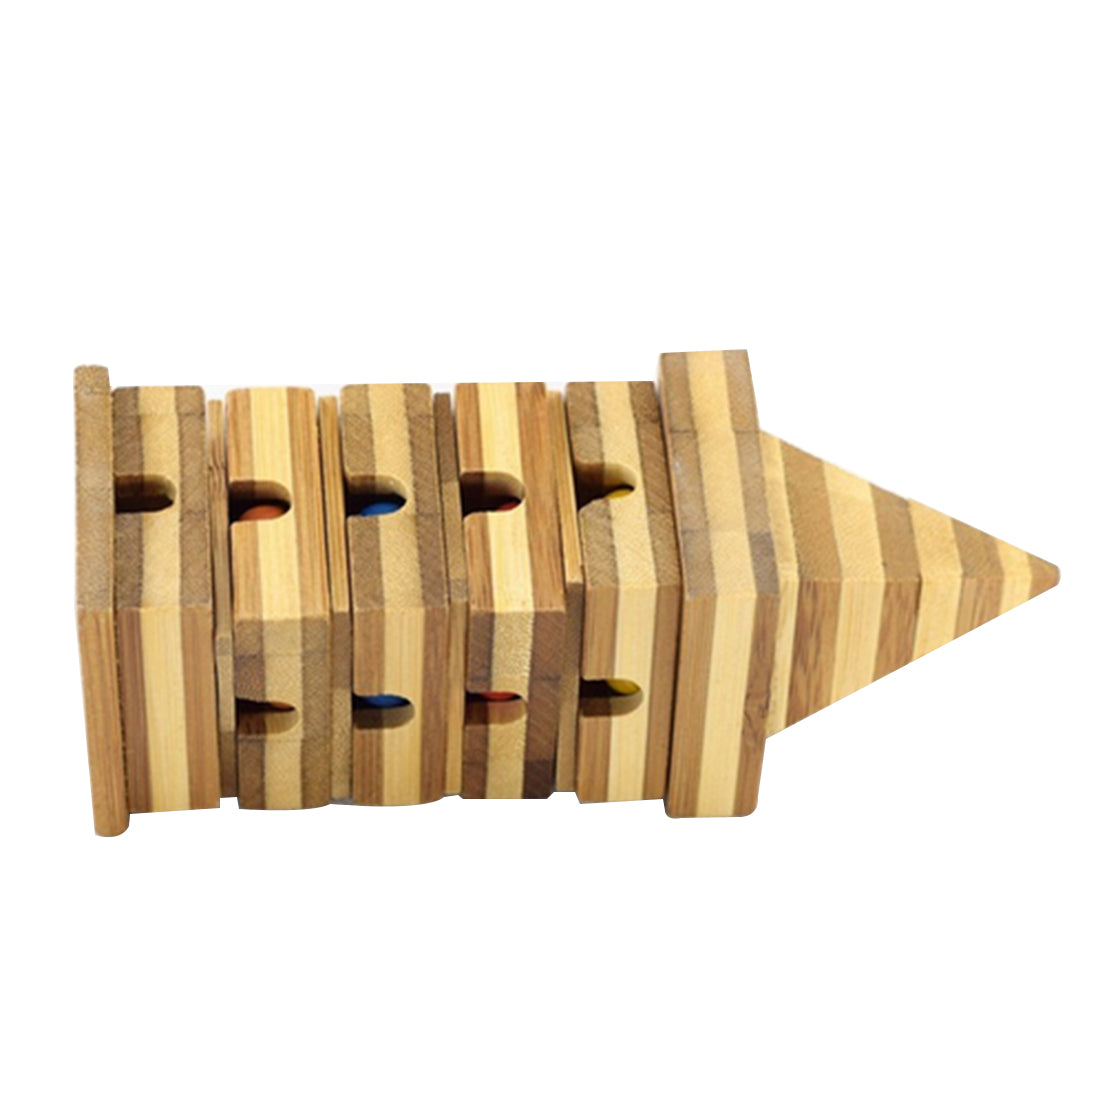 Bamboo Pyramid Design Kong Ming Lock Table Game Children Learning Educational Toys